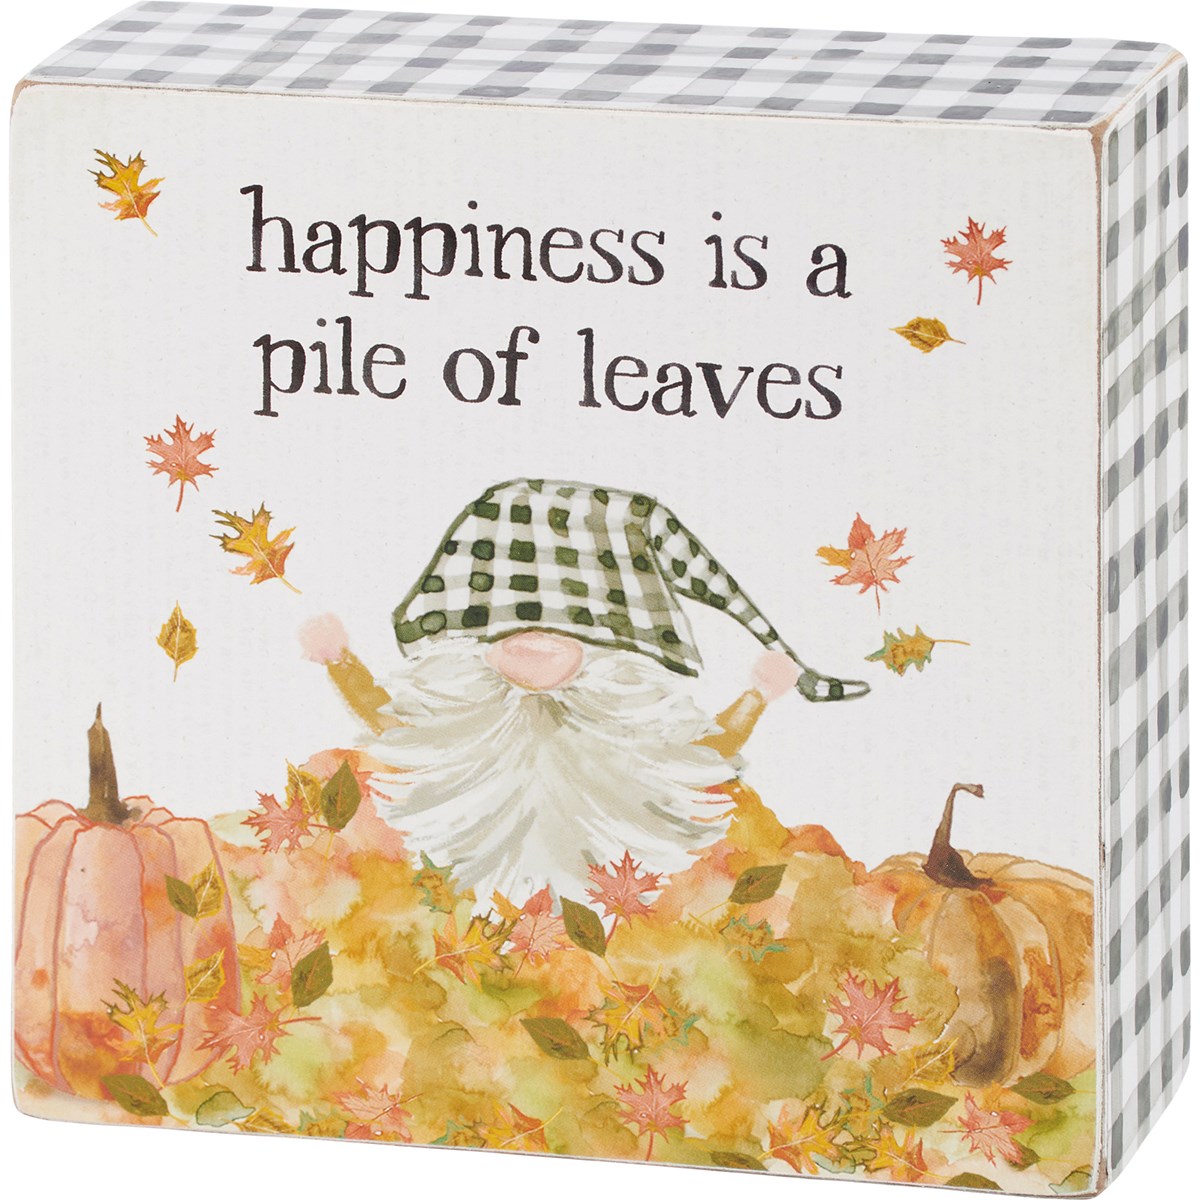 Box Sign - Happiness Is A Pile Of Leaves - 6" x 6" x 1.75" - Wood, Paper